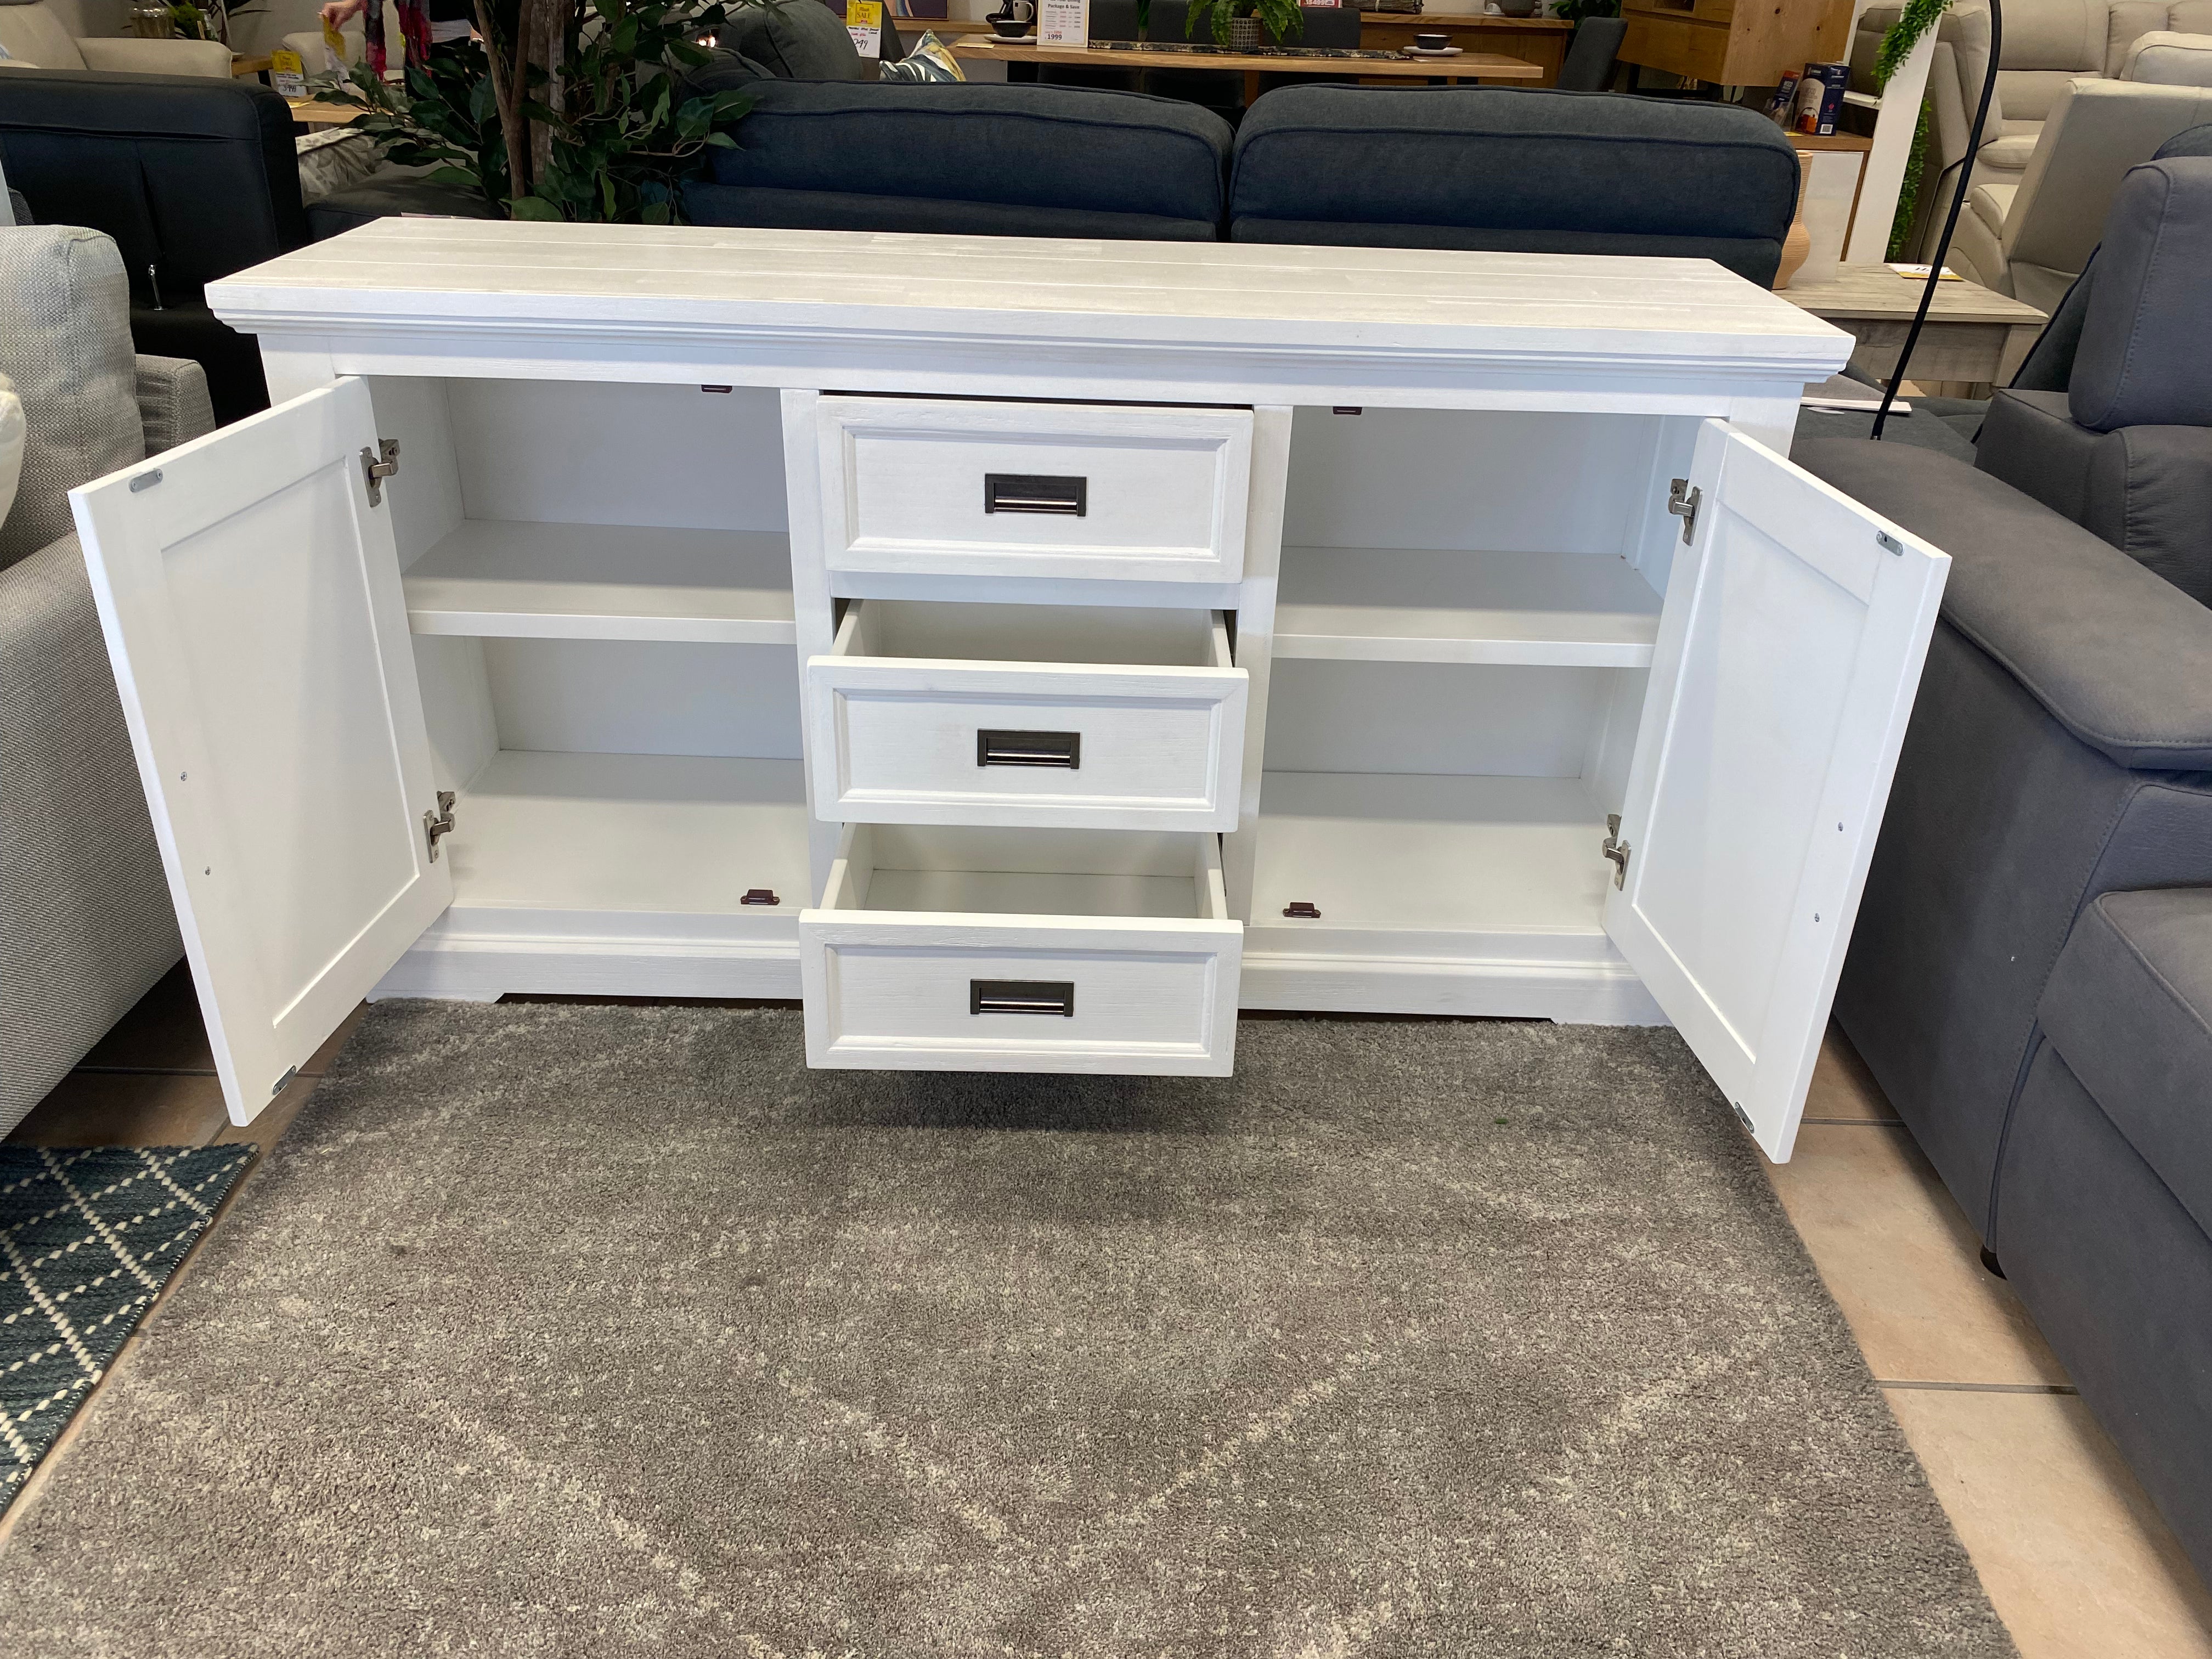 Eastport Buffet In all over white finish